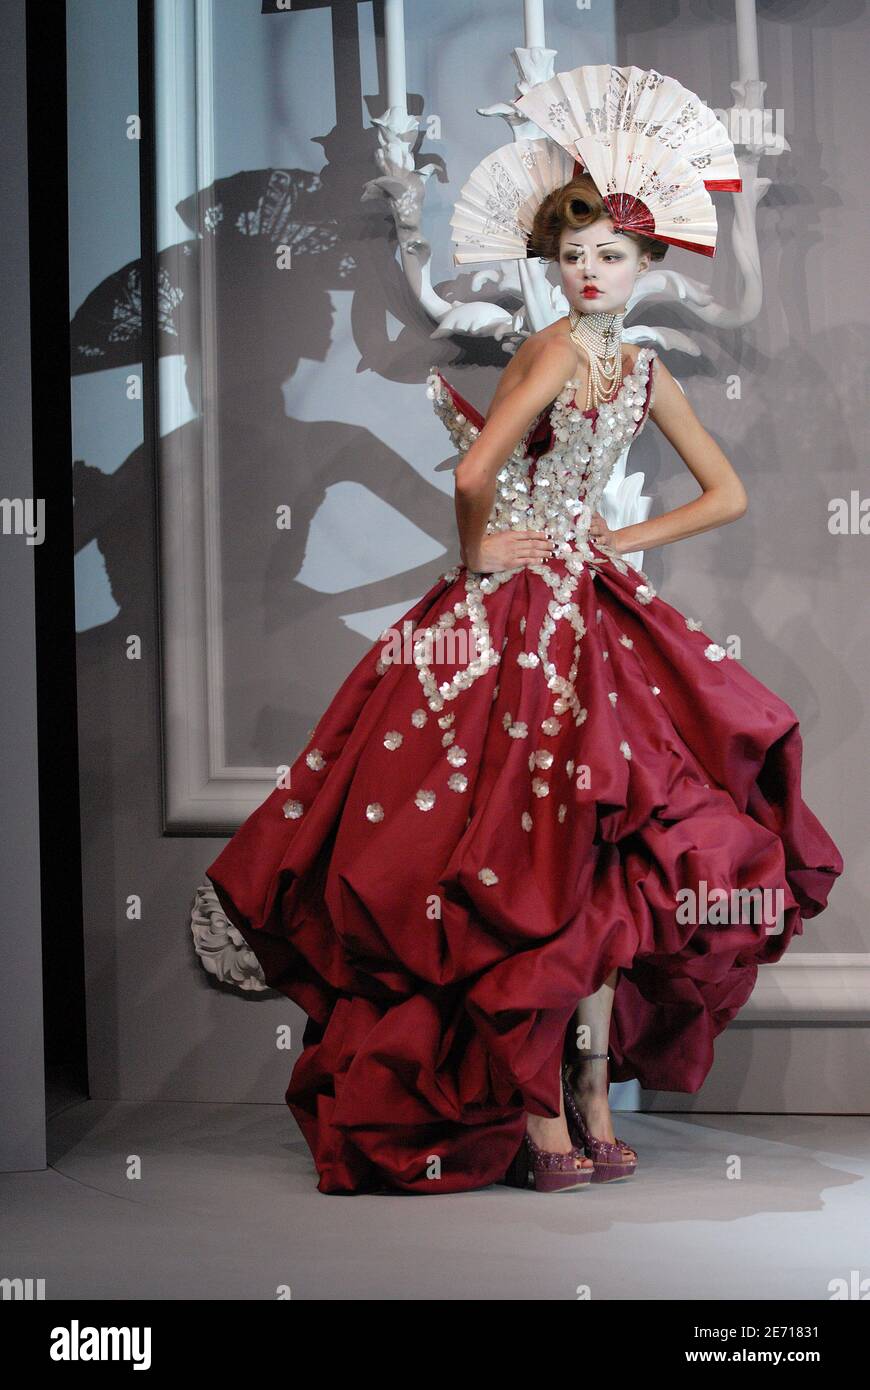 A model displays a creation by fashion designer John Galliano for Christian Dior Haute-Couture Spring-Summer 2007 collection presentation held at the 'Polo de Paris' in Paris, France, on January 22, 2007. Photo by Khayat-Nebinger-Orban-Taamallah/ABACAPRESS.COM Stock Photo